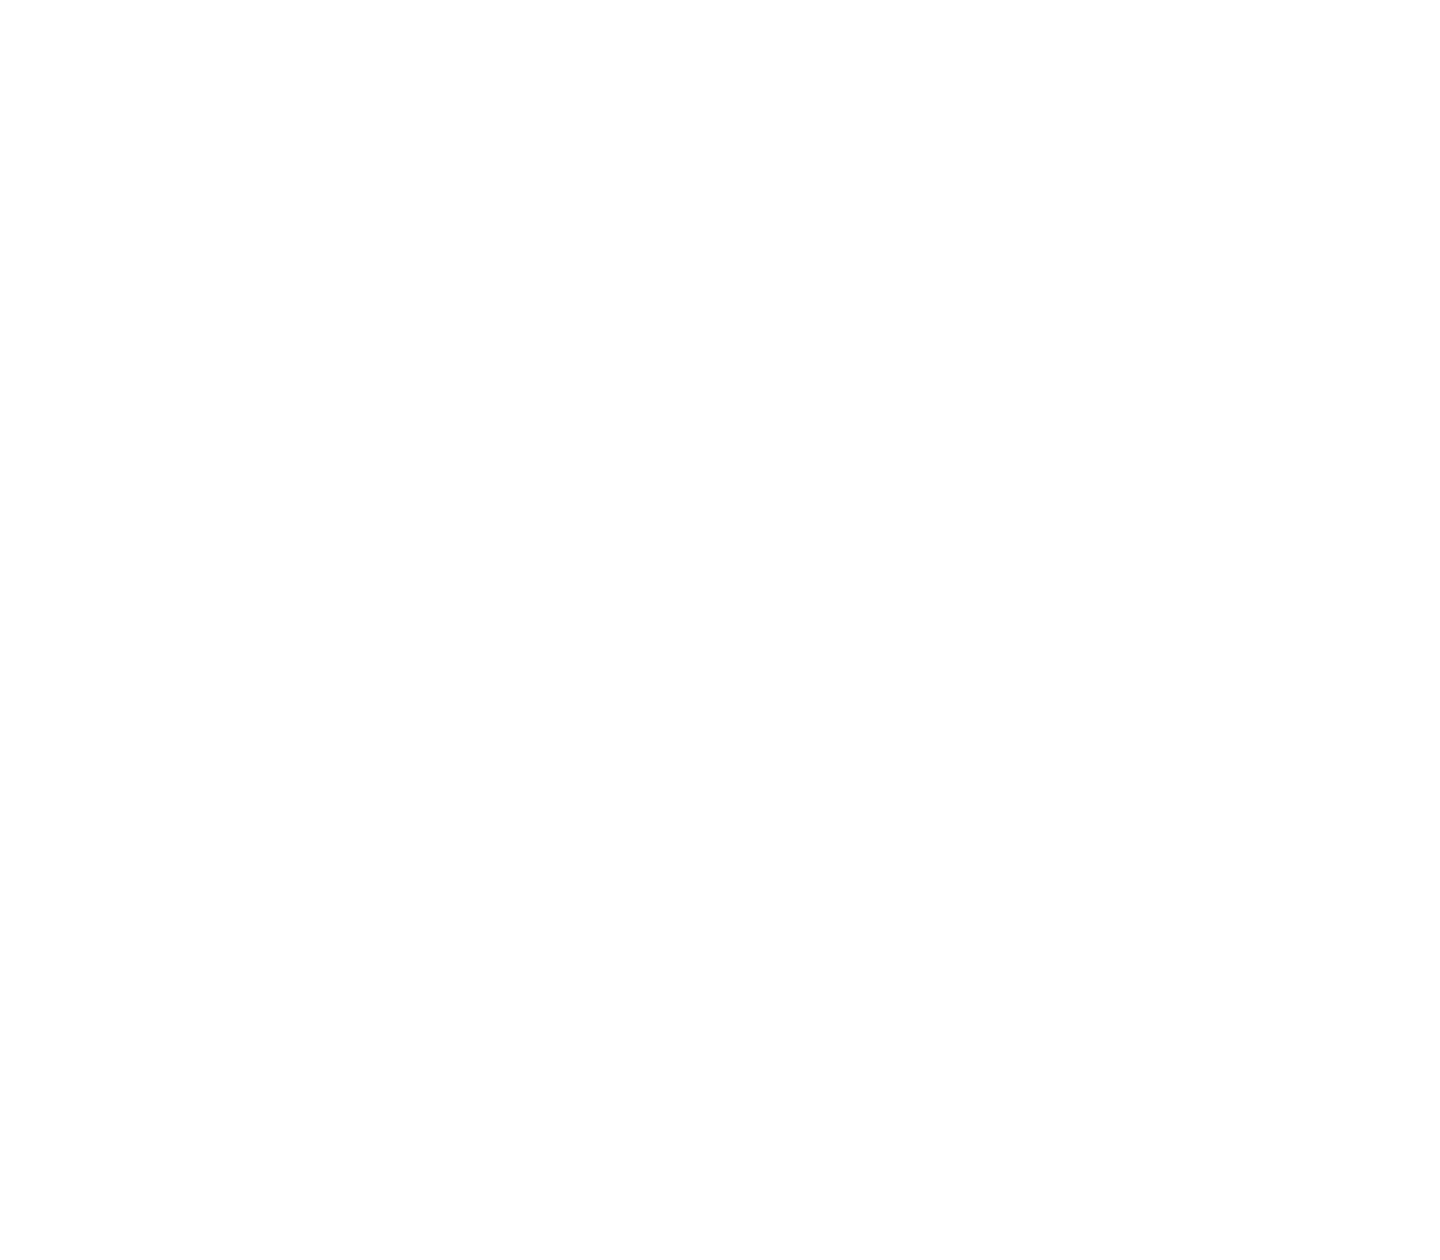 We Are Wildness